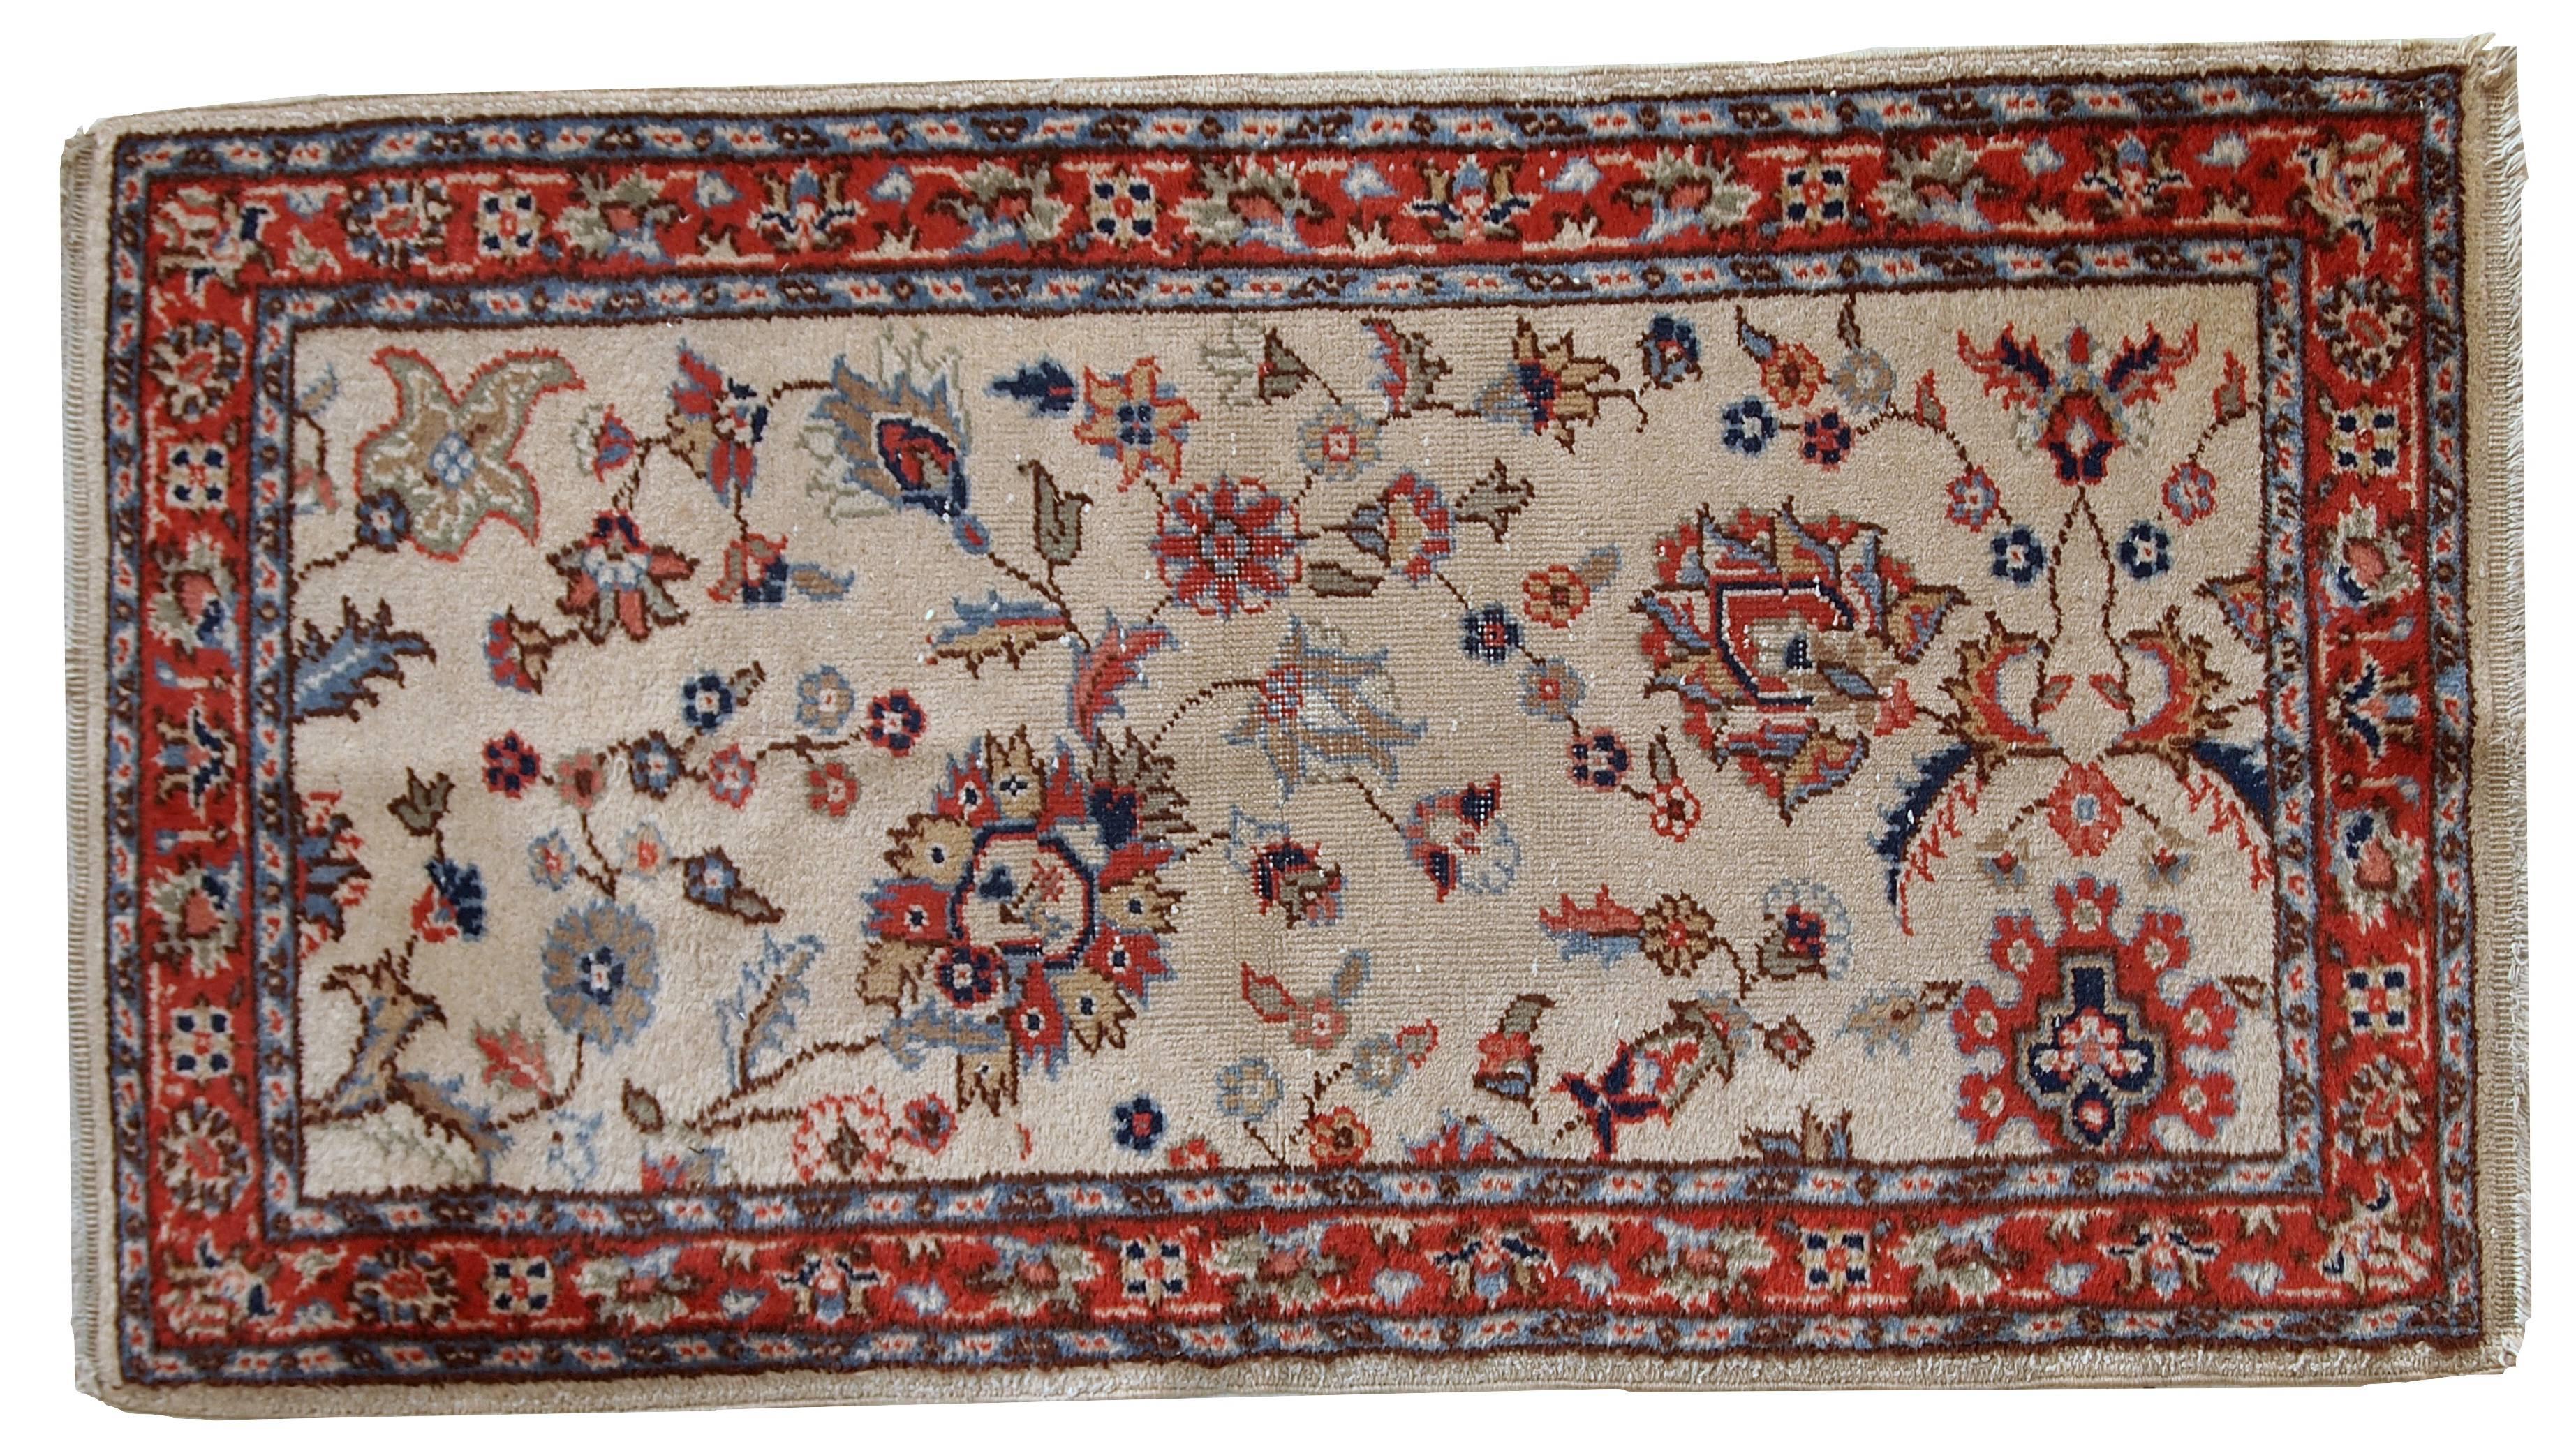 Vintage handmade Pakistani Lahore rug. This Pakistani rug has beige open field with floral accent on it in red, navy blue and olive green shades. The red border is also decorated with floral design. The rug is in original condition, it has some low